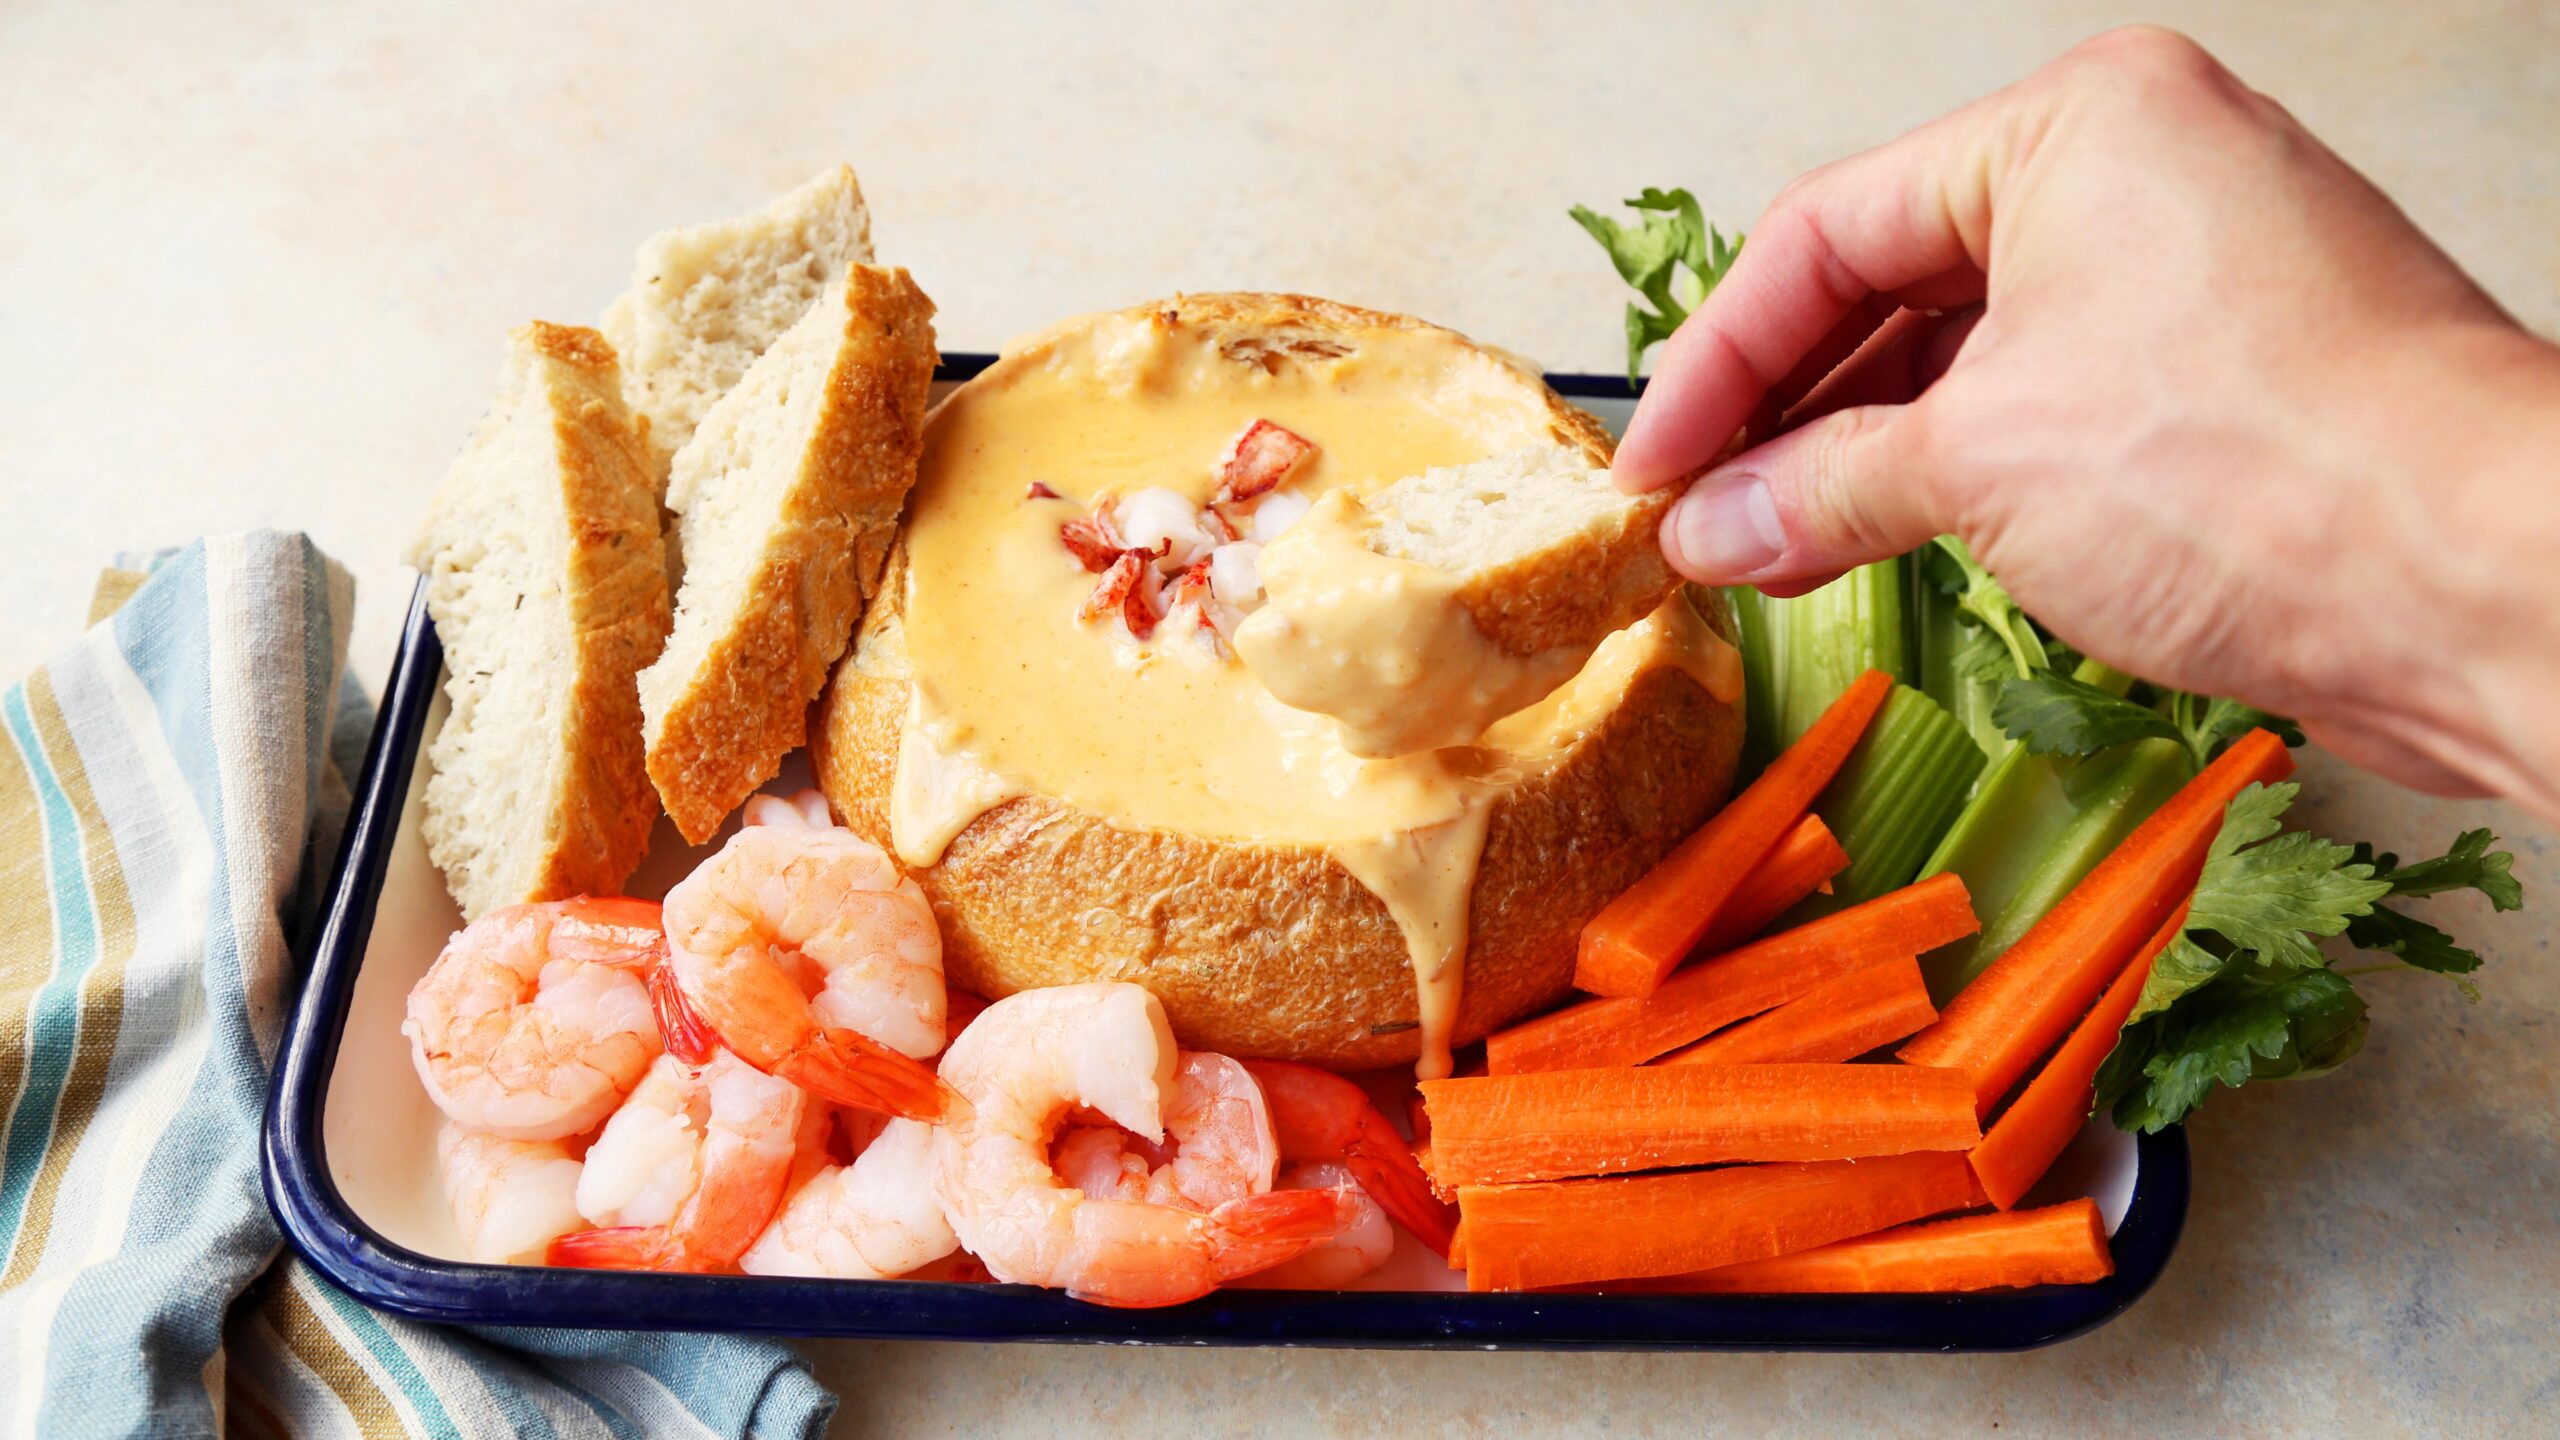  Be prepared to fall in love with the buttery, melt-in-your-mouth lobster meat that pairs exceptionally well with the tangy dipping sauce.